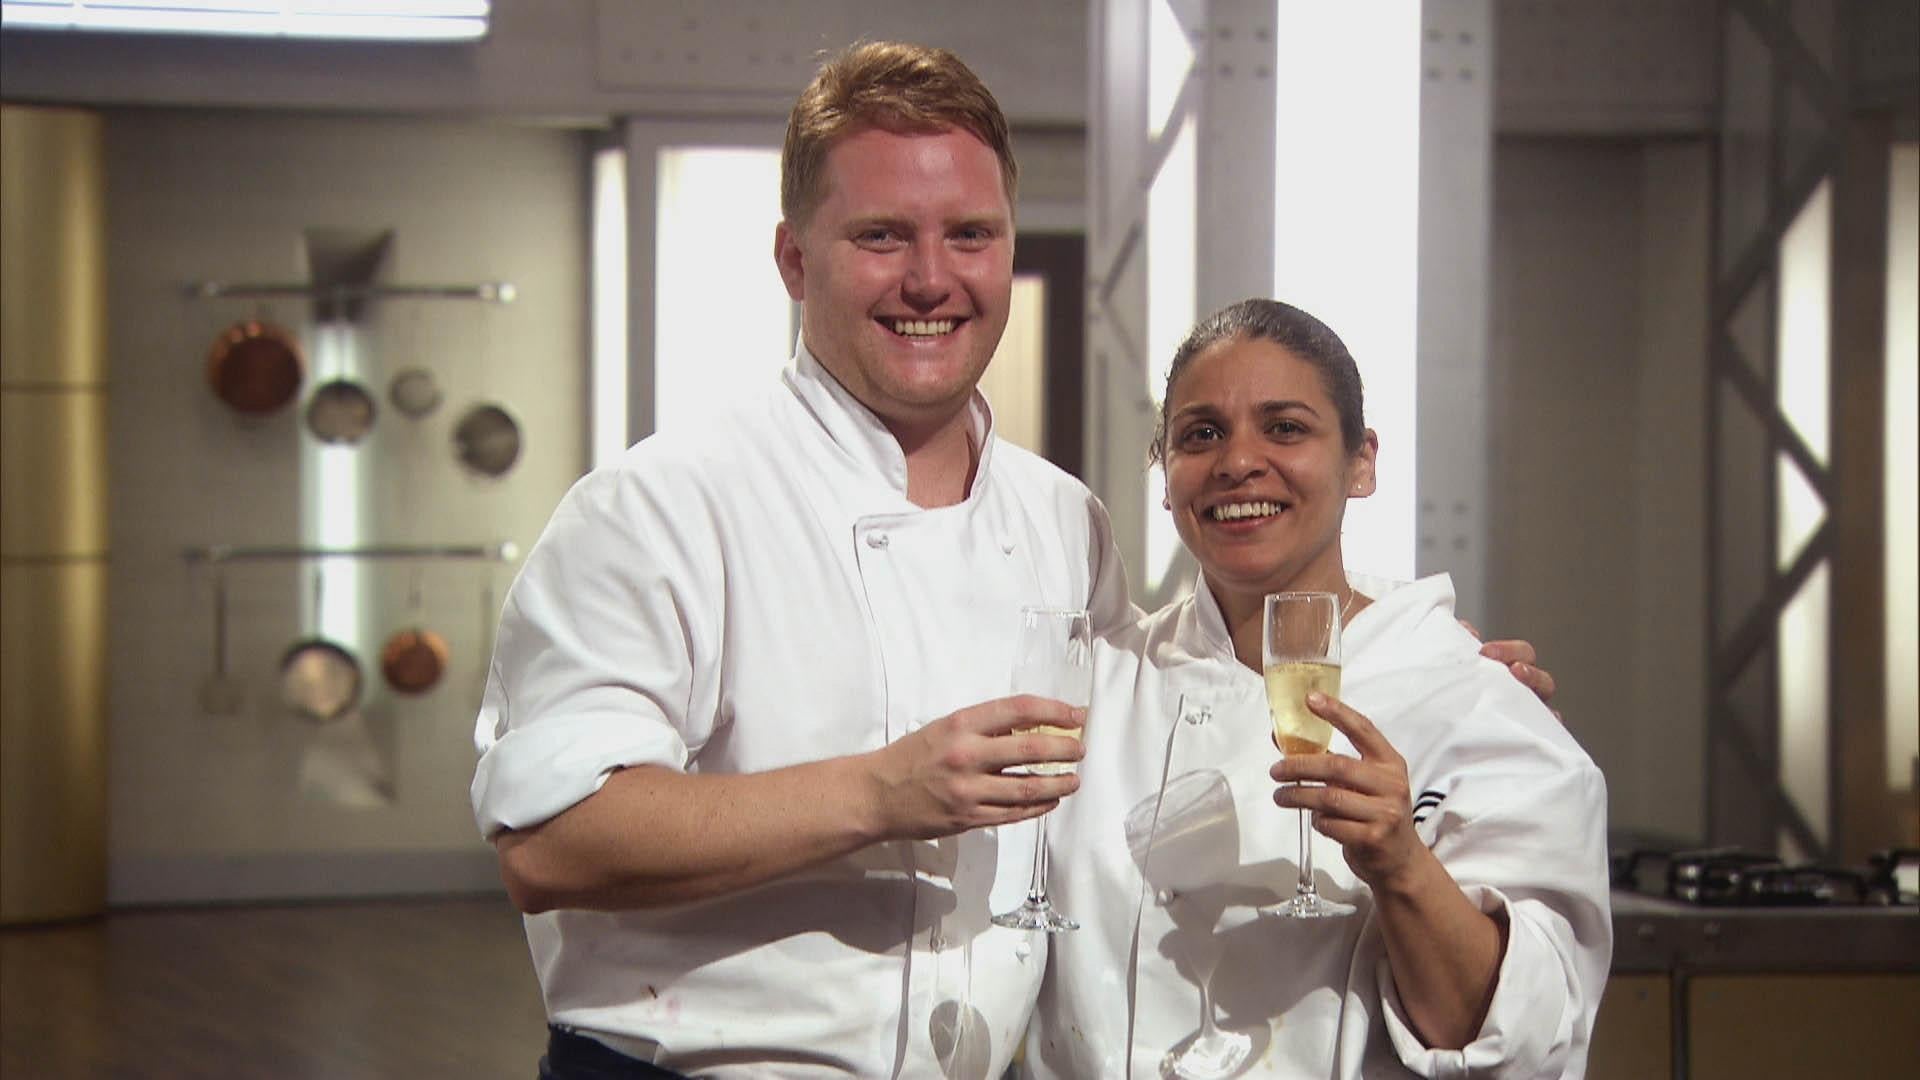 Keri Moss (right), 41, and Anton Piotrowski, 30, who shared the title as MasterChef: The Professionals reached its climax and they still could not be separated.